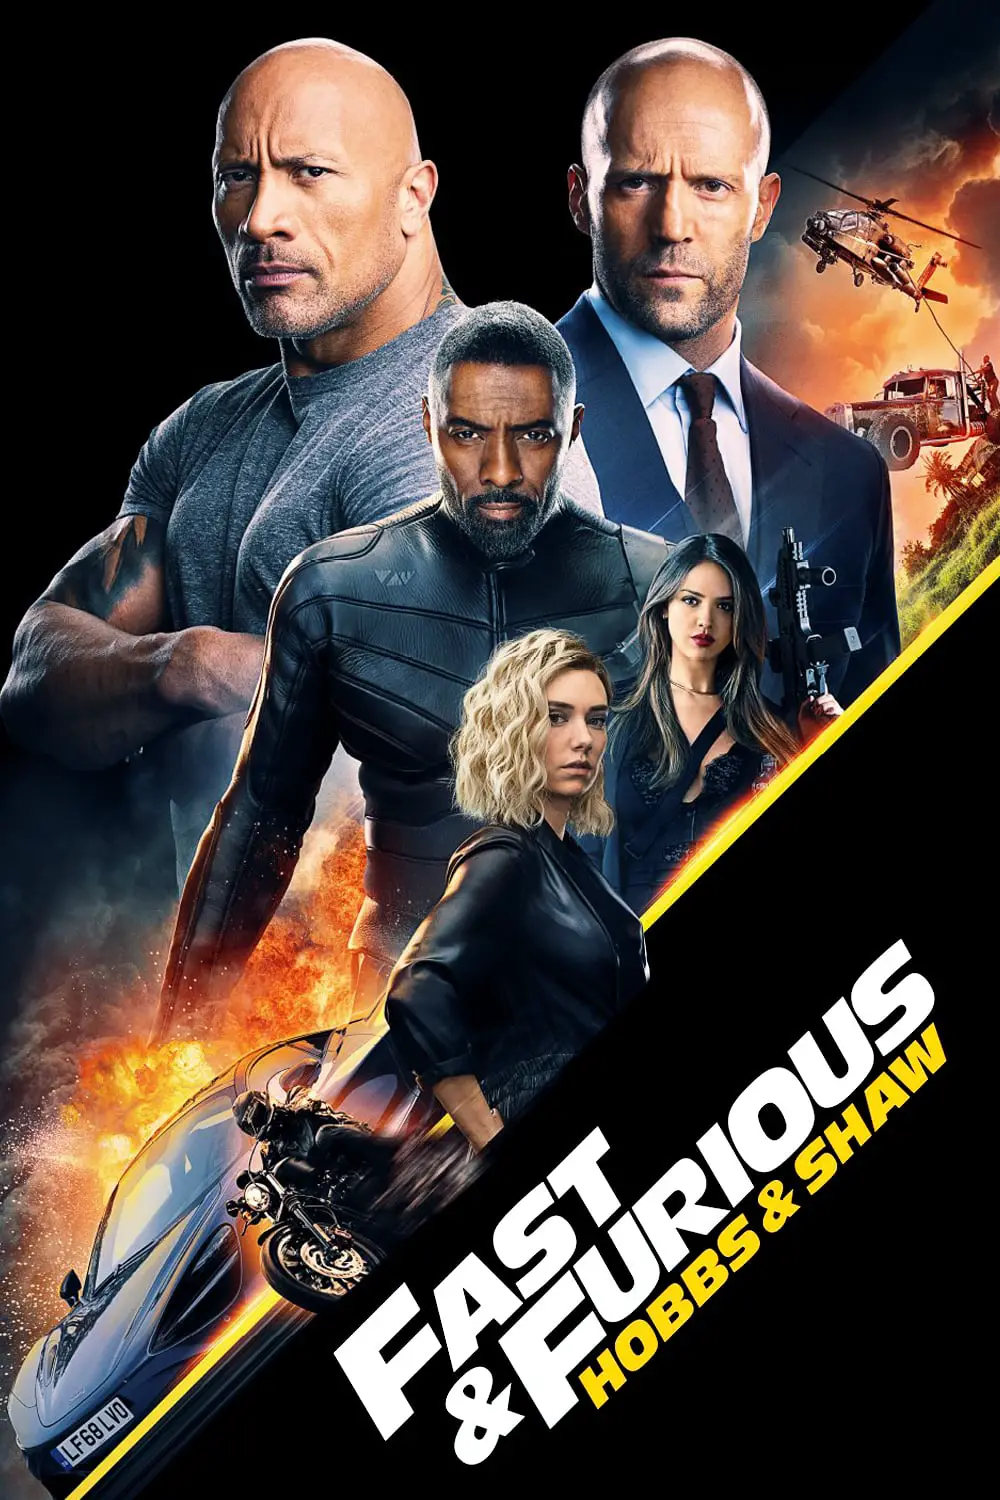 Fast and Furious Presents: Hobbs & Shaw